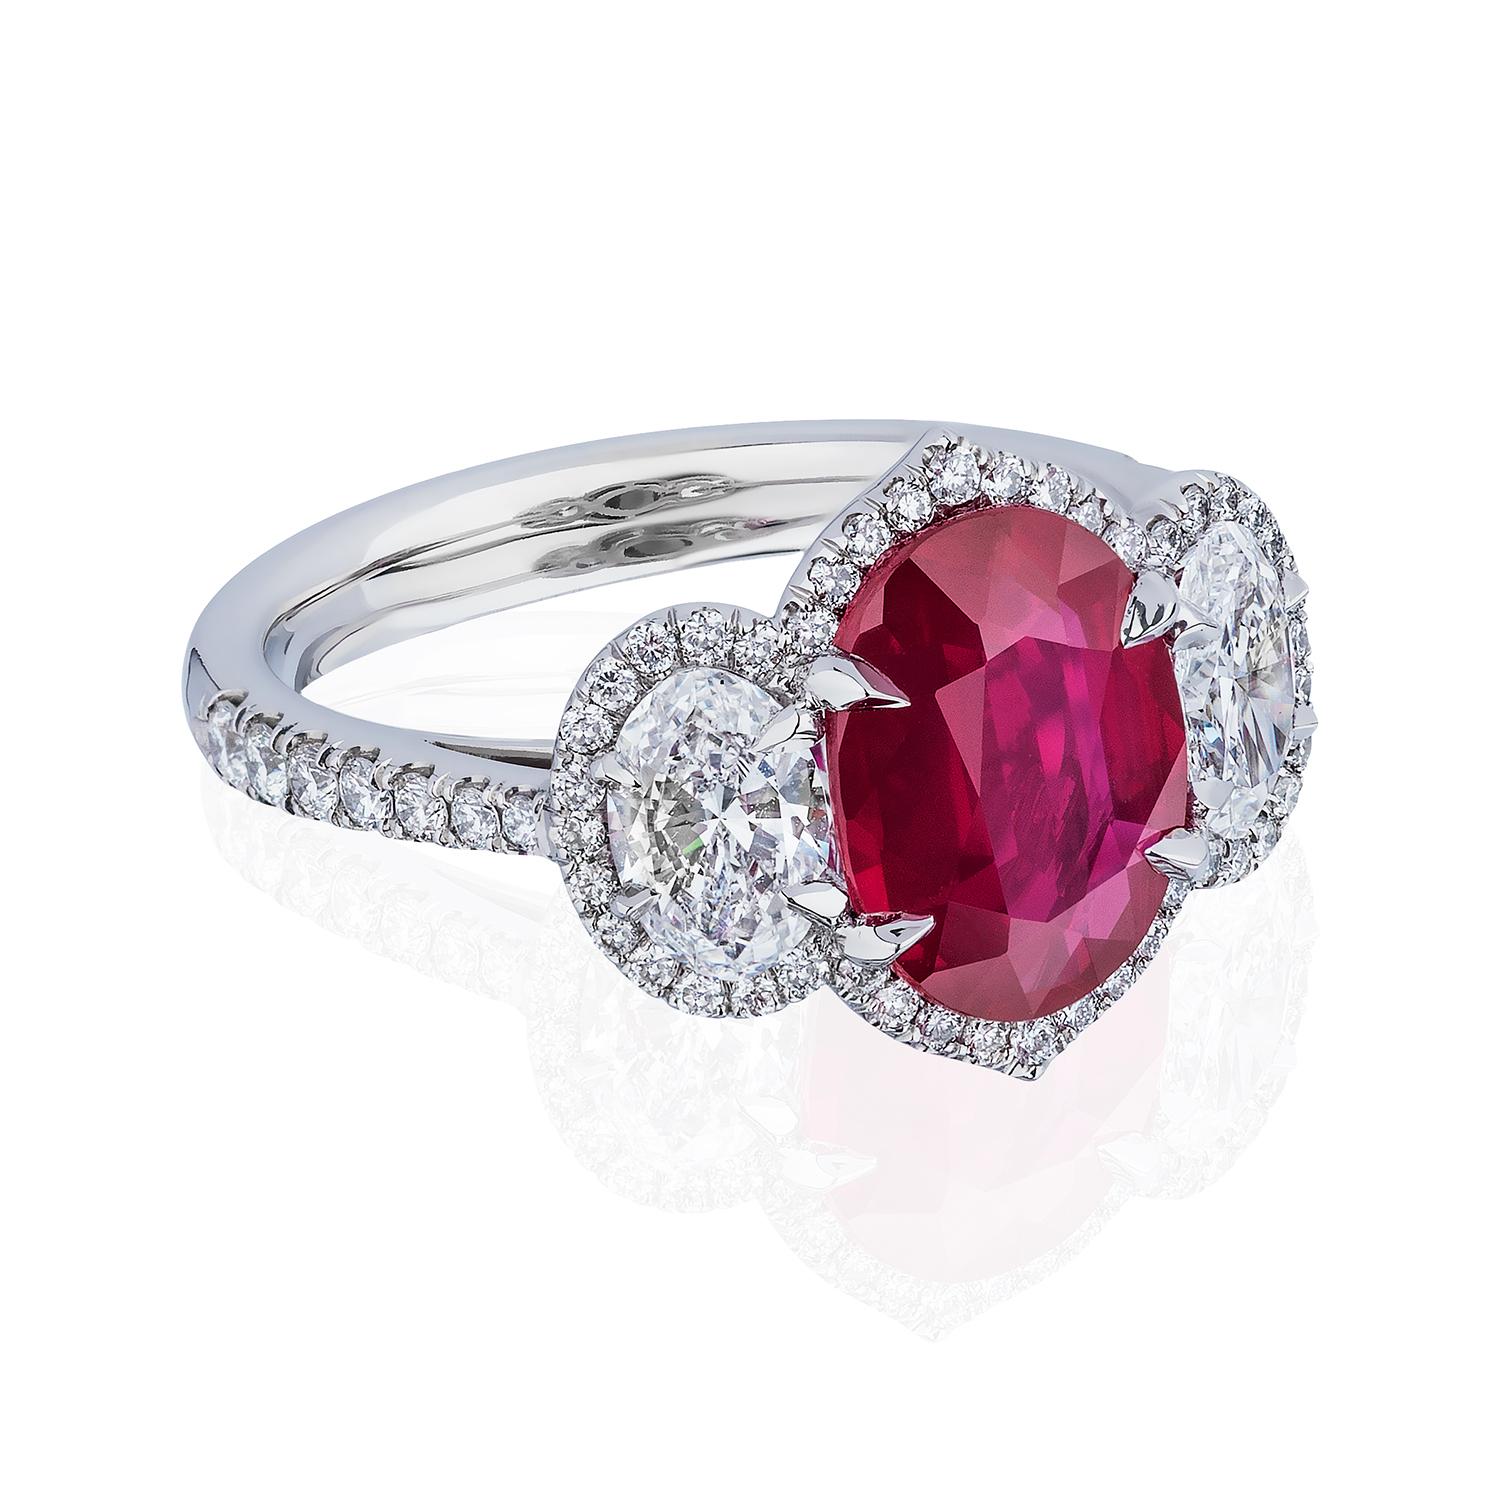 Unheated Ruby and Diamond Three Stone Ring

Gorgeous and highly sought Purplish Red Ruby weighing 2.61 Carats with No Heat Treatments flanked by 2 Oval Diamonds of D color and VS Clarity each weighing 0.40 Carats, surrounded with pave set Round